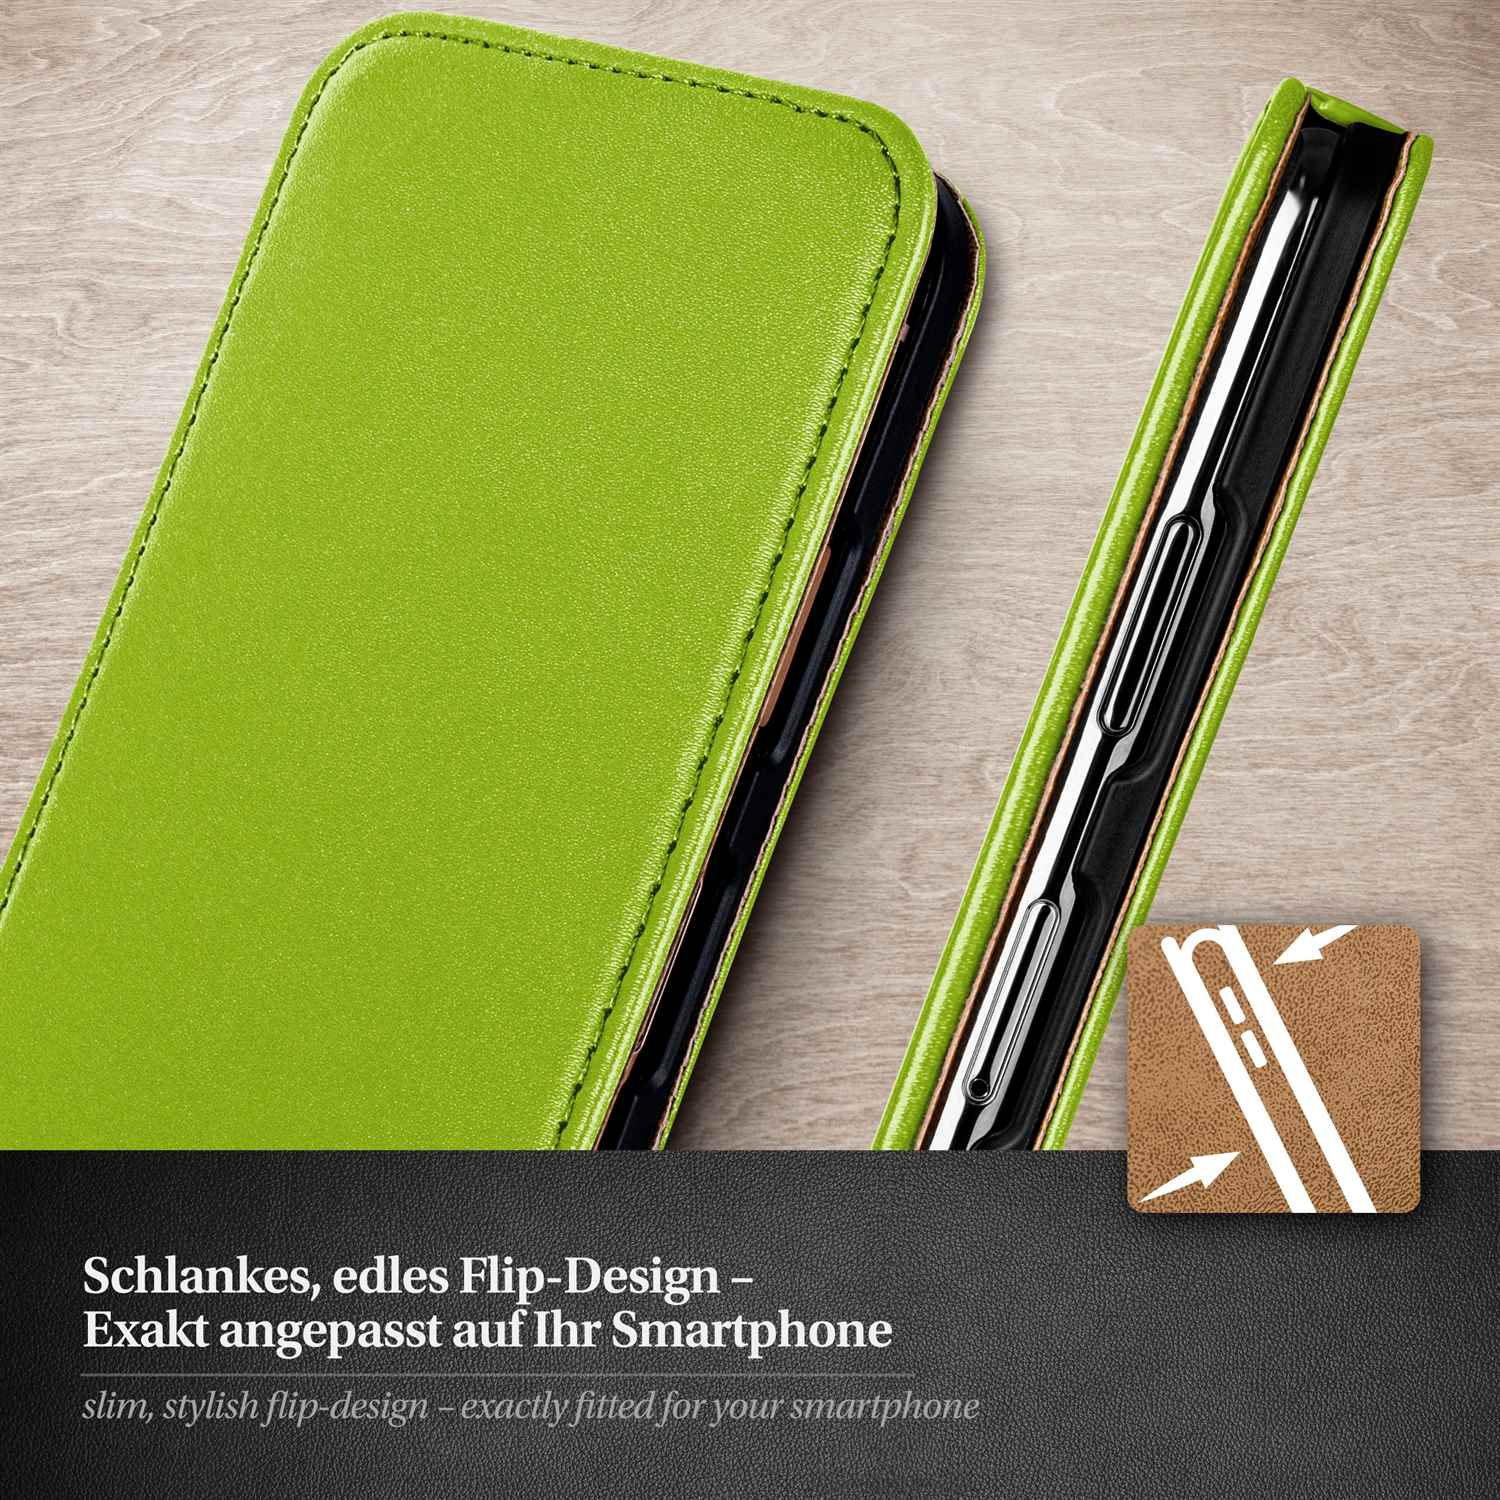 MOEX Flip Case, Ascend Huawei, Flip Y300, Lime-Green Cover